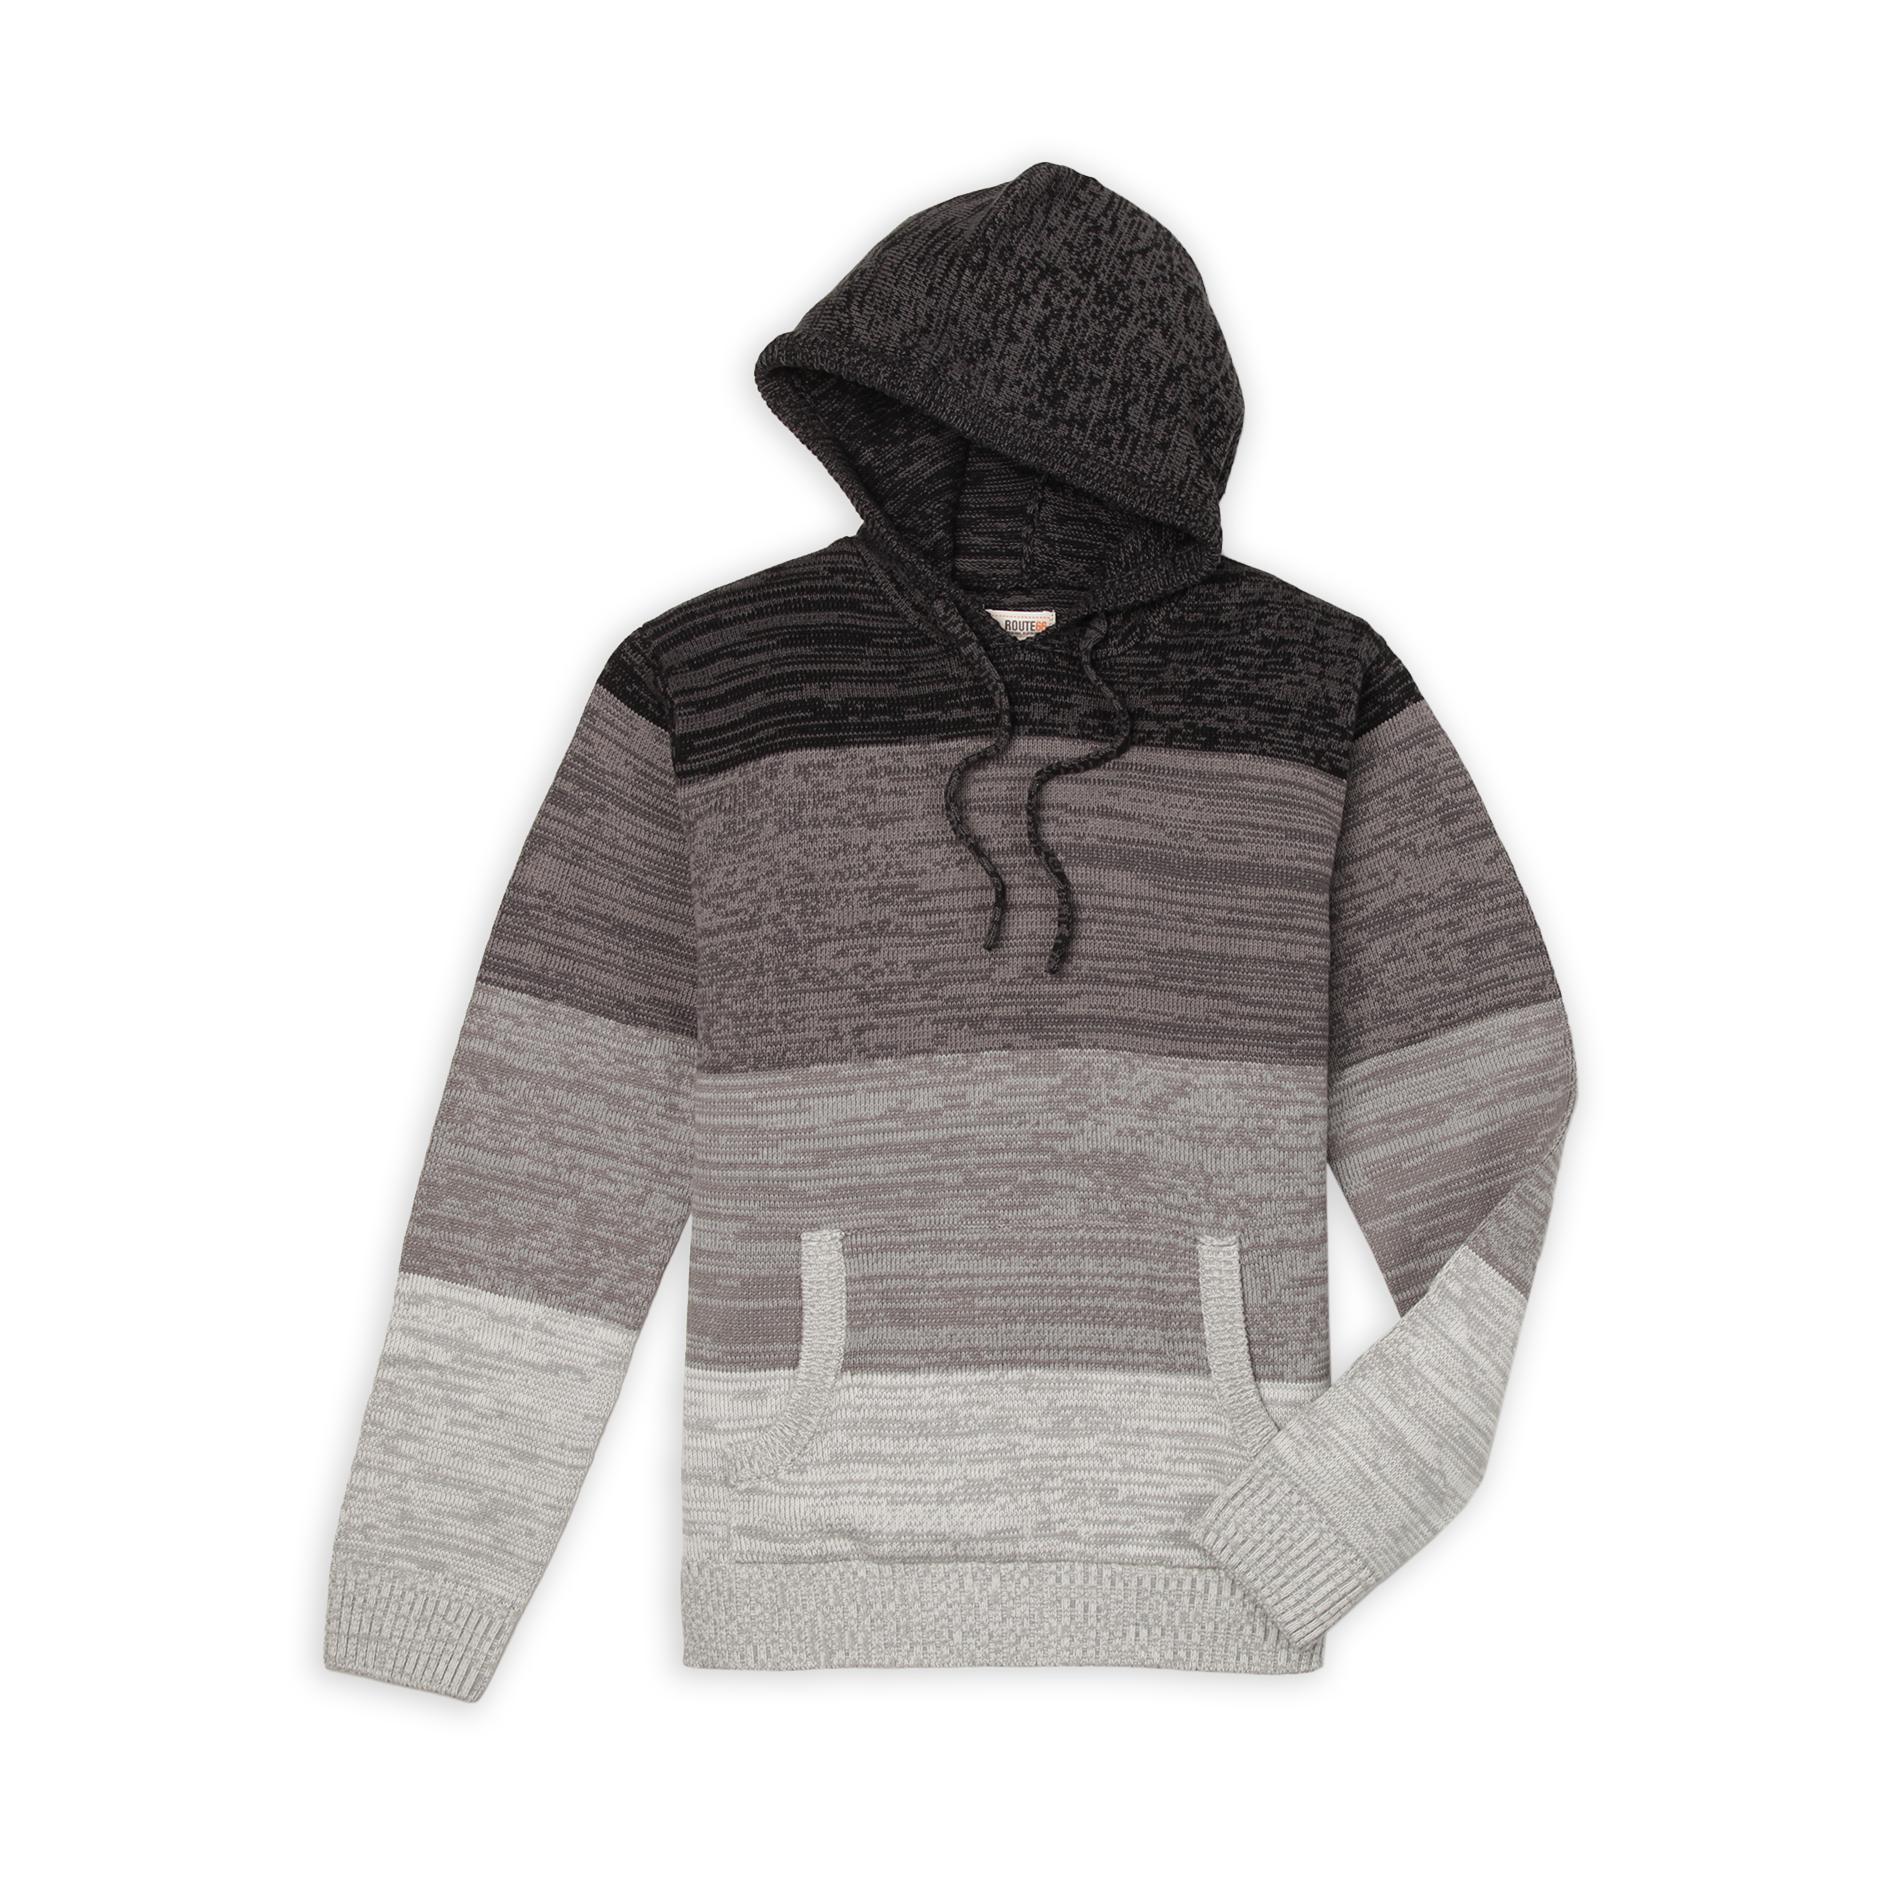 Route 66 Men's Marled Knit Hoodie - Ombre